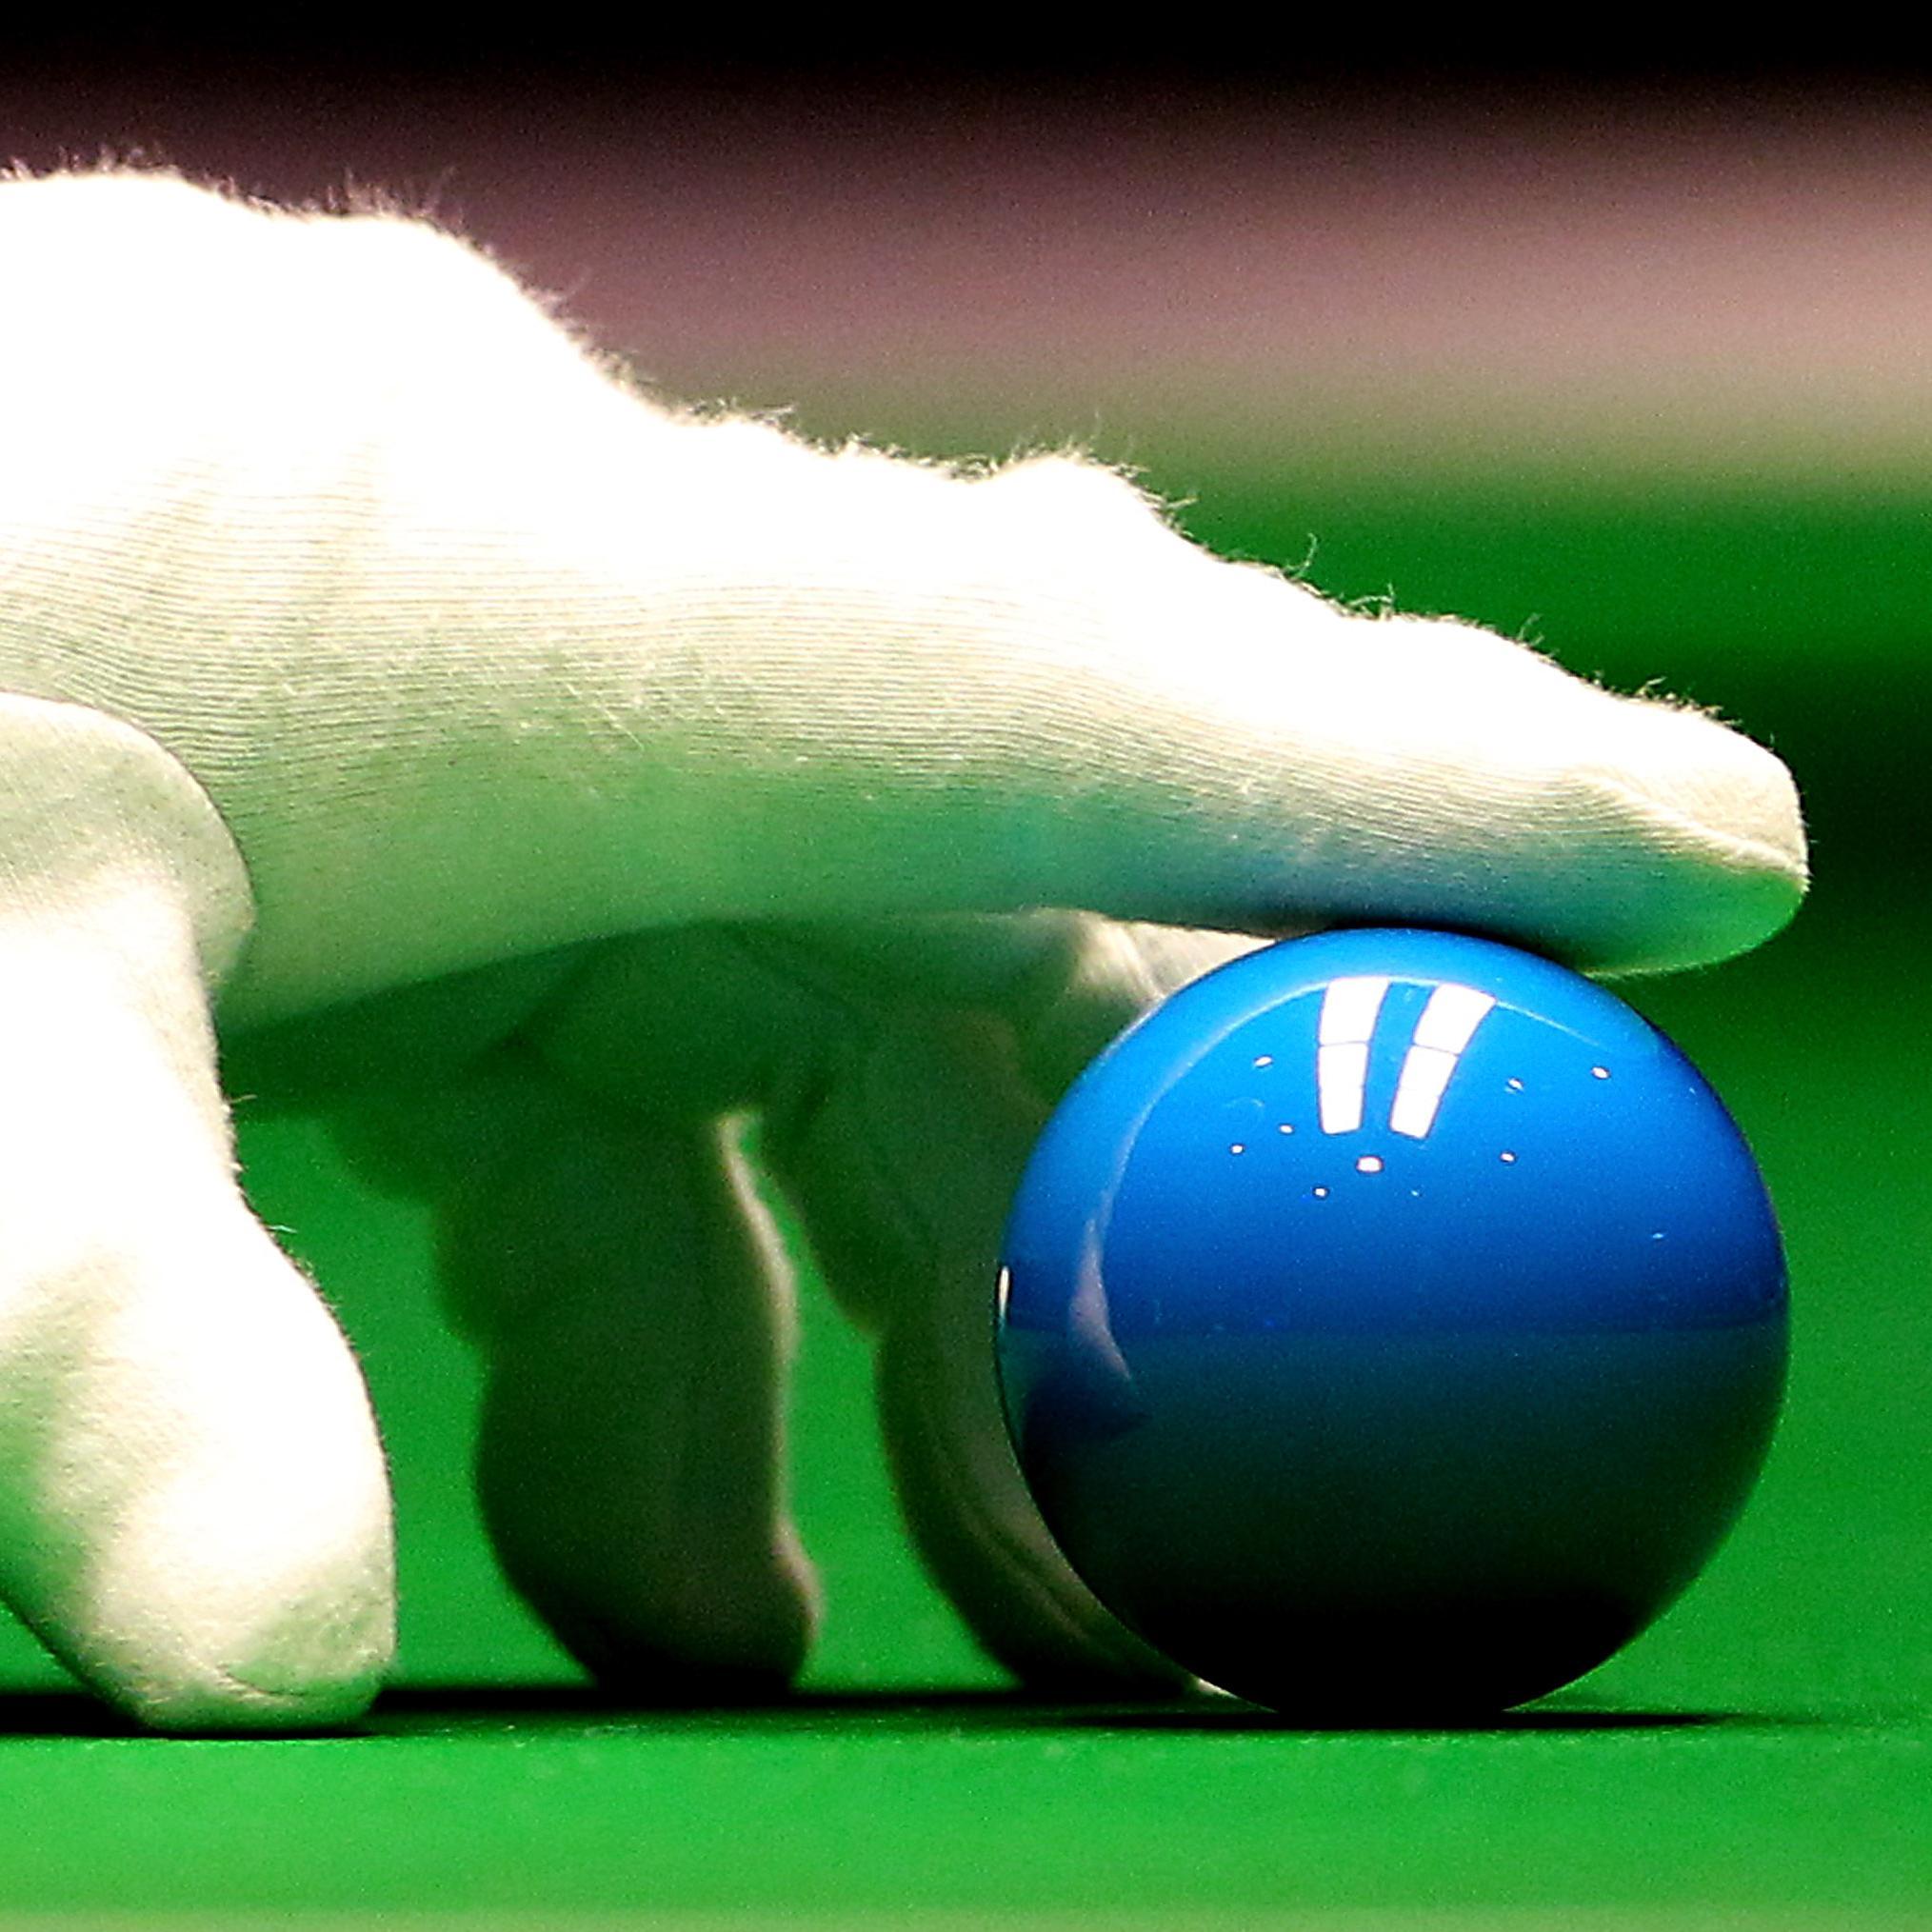 This account is no longer tweeting. All future snooker updates on Twitter will come from @BBCSport.